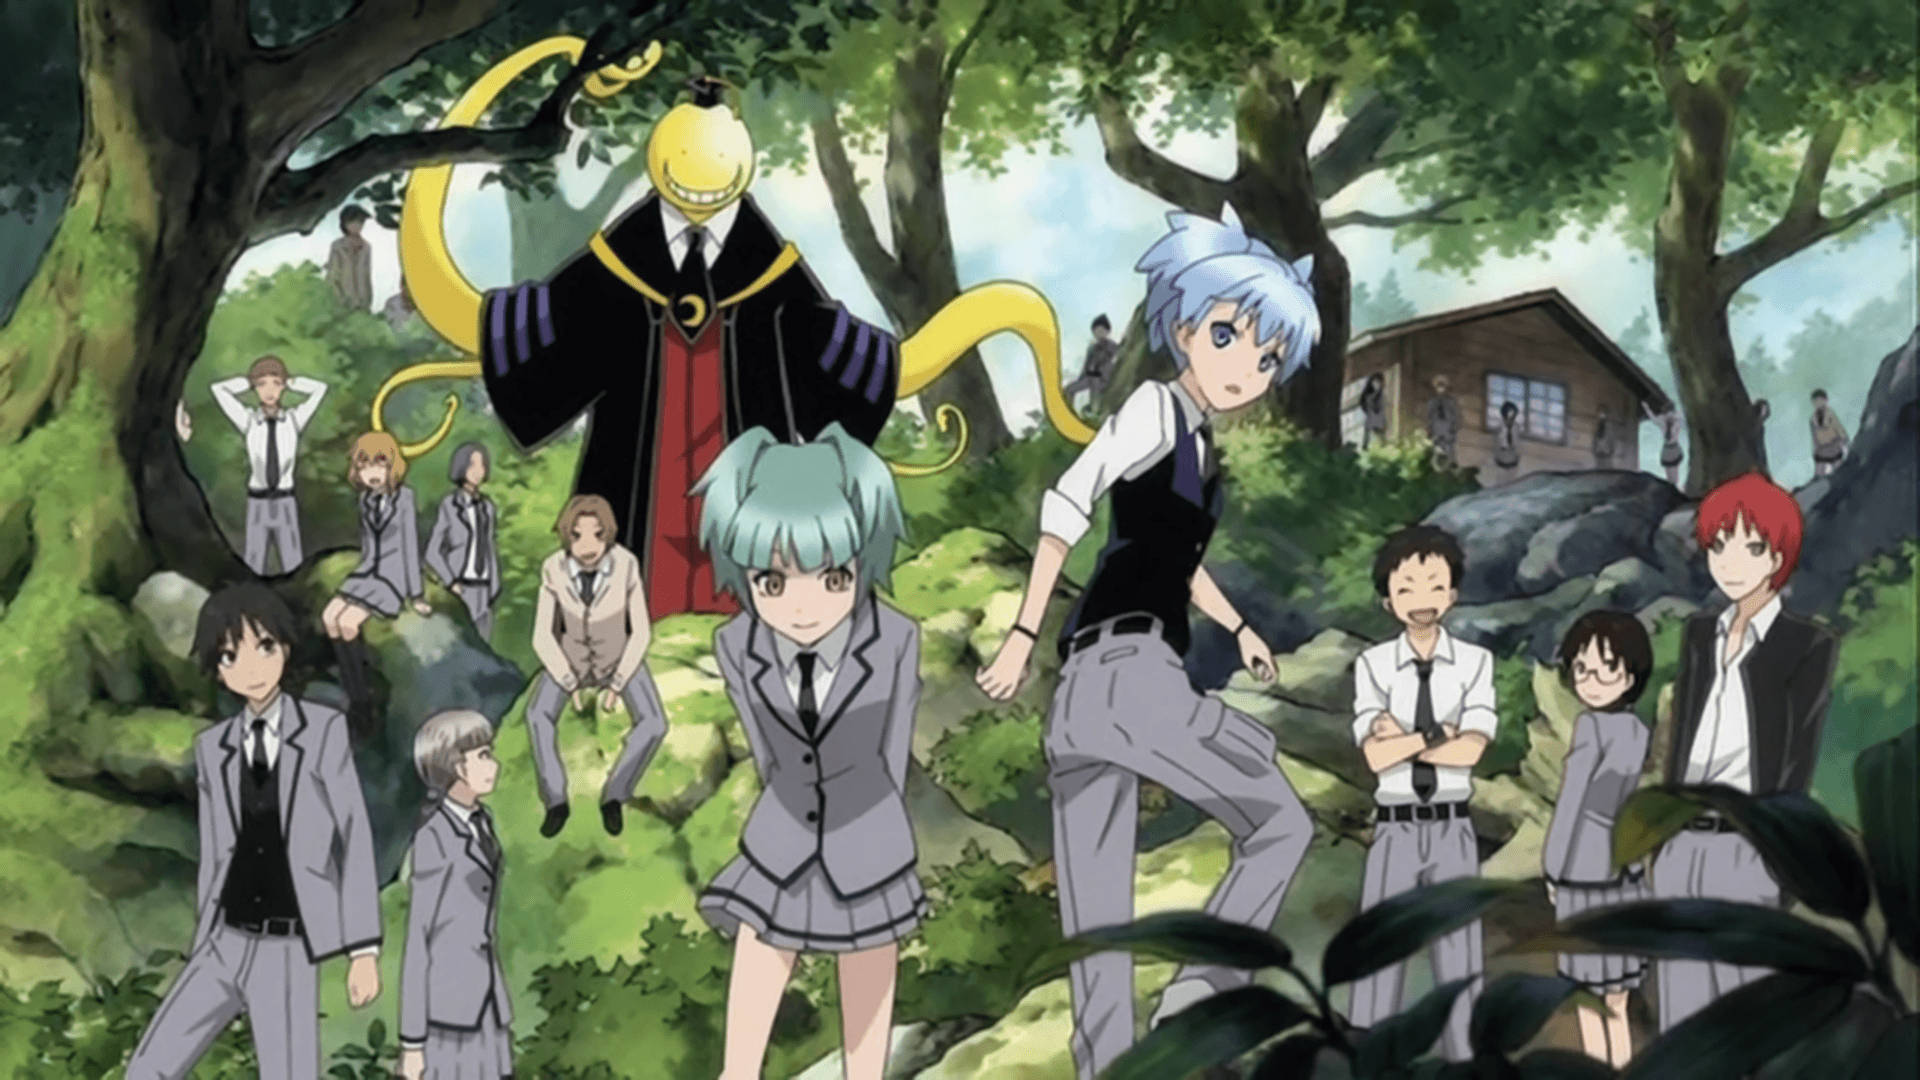 1920X1080 Assassination Classroom Wallpaper and Background